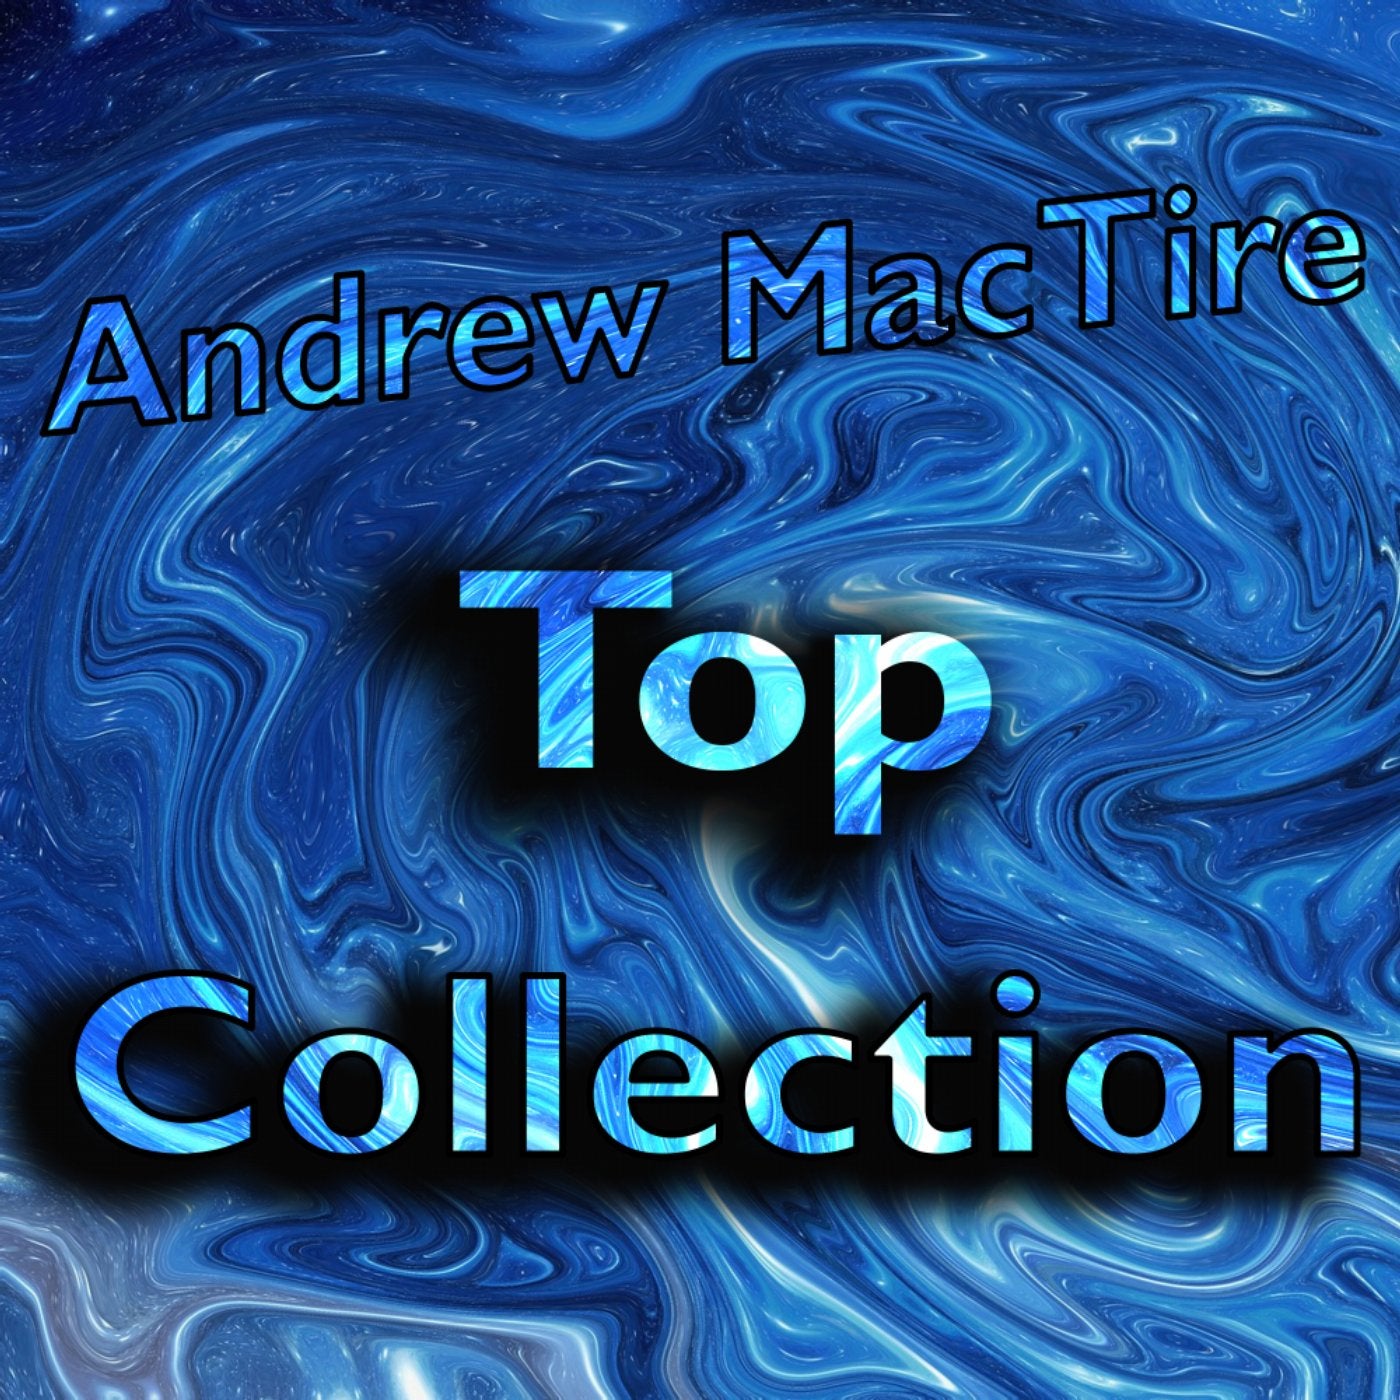 Top Collection